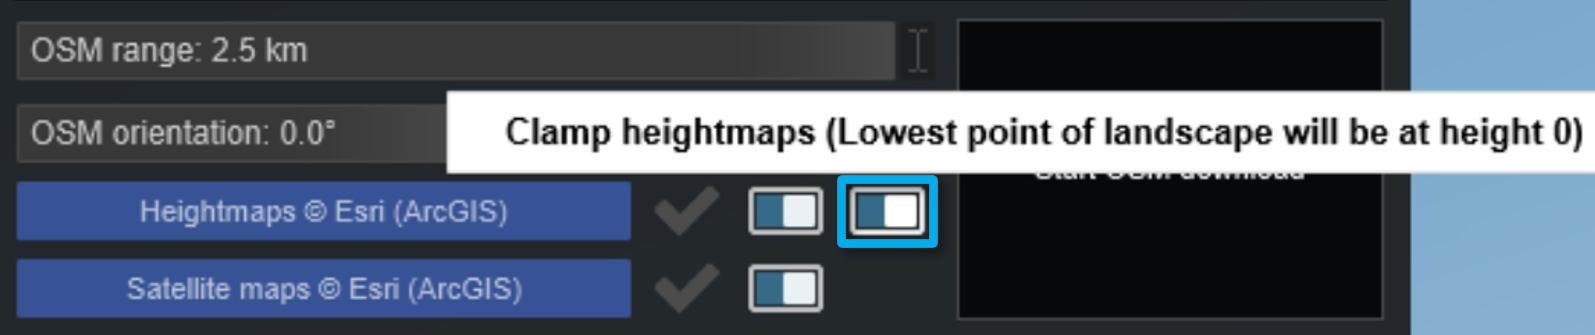 OSM_Clamp_Heightmaps.png